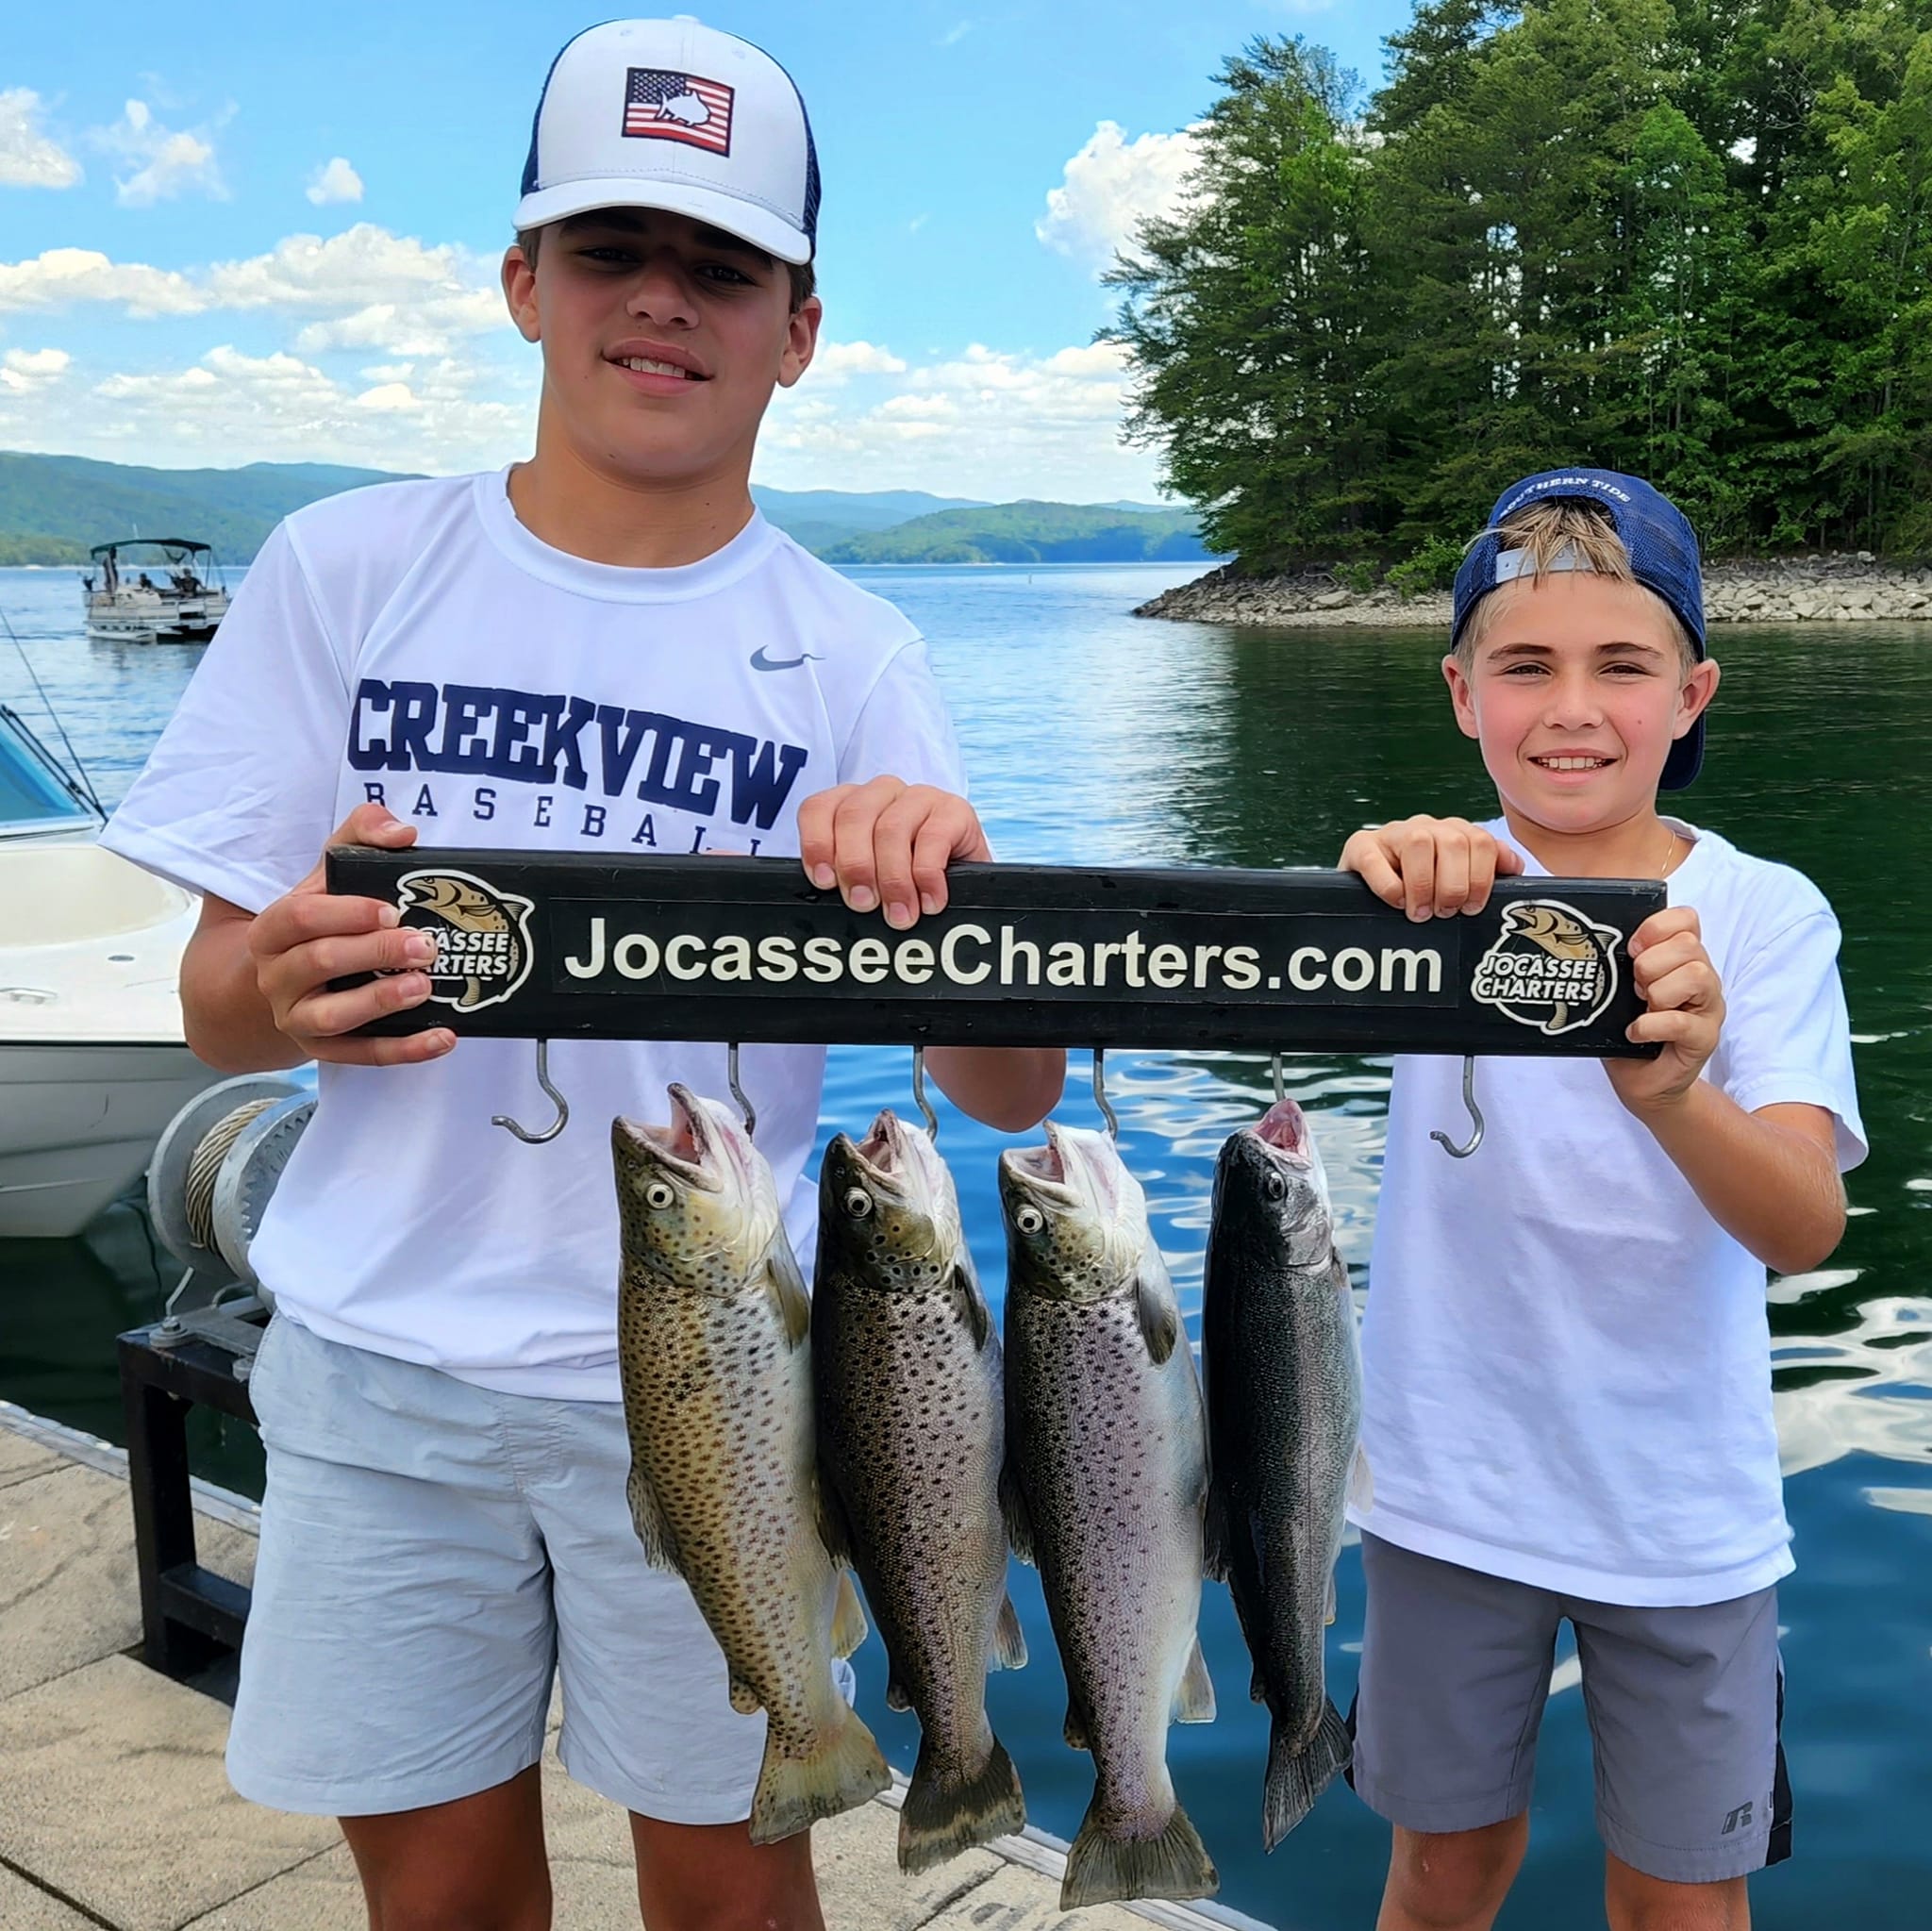 A nice catch this week with Jocassee Charters